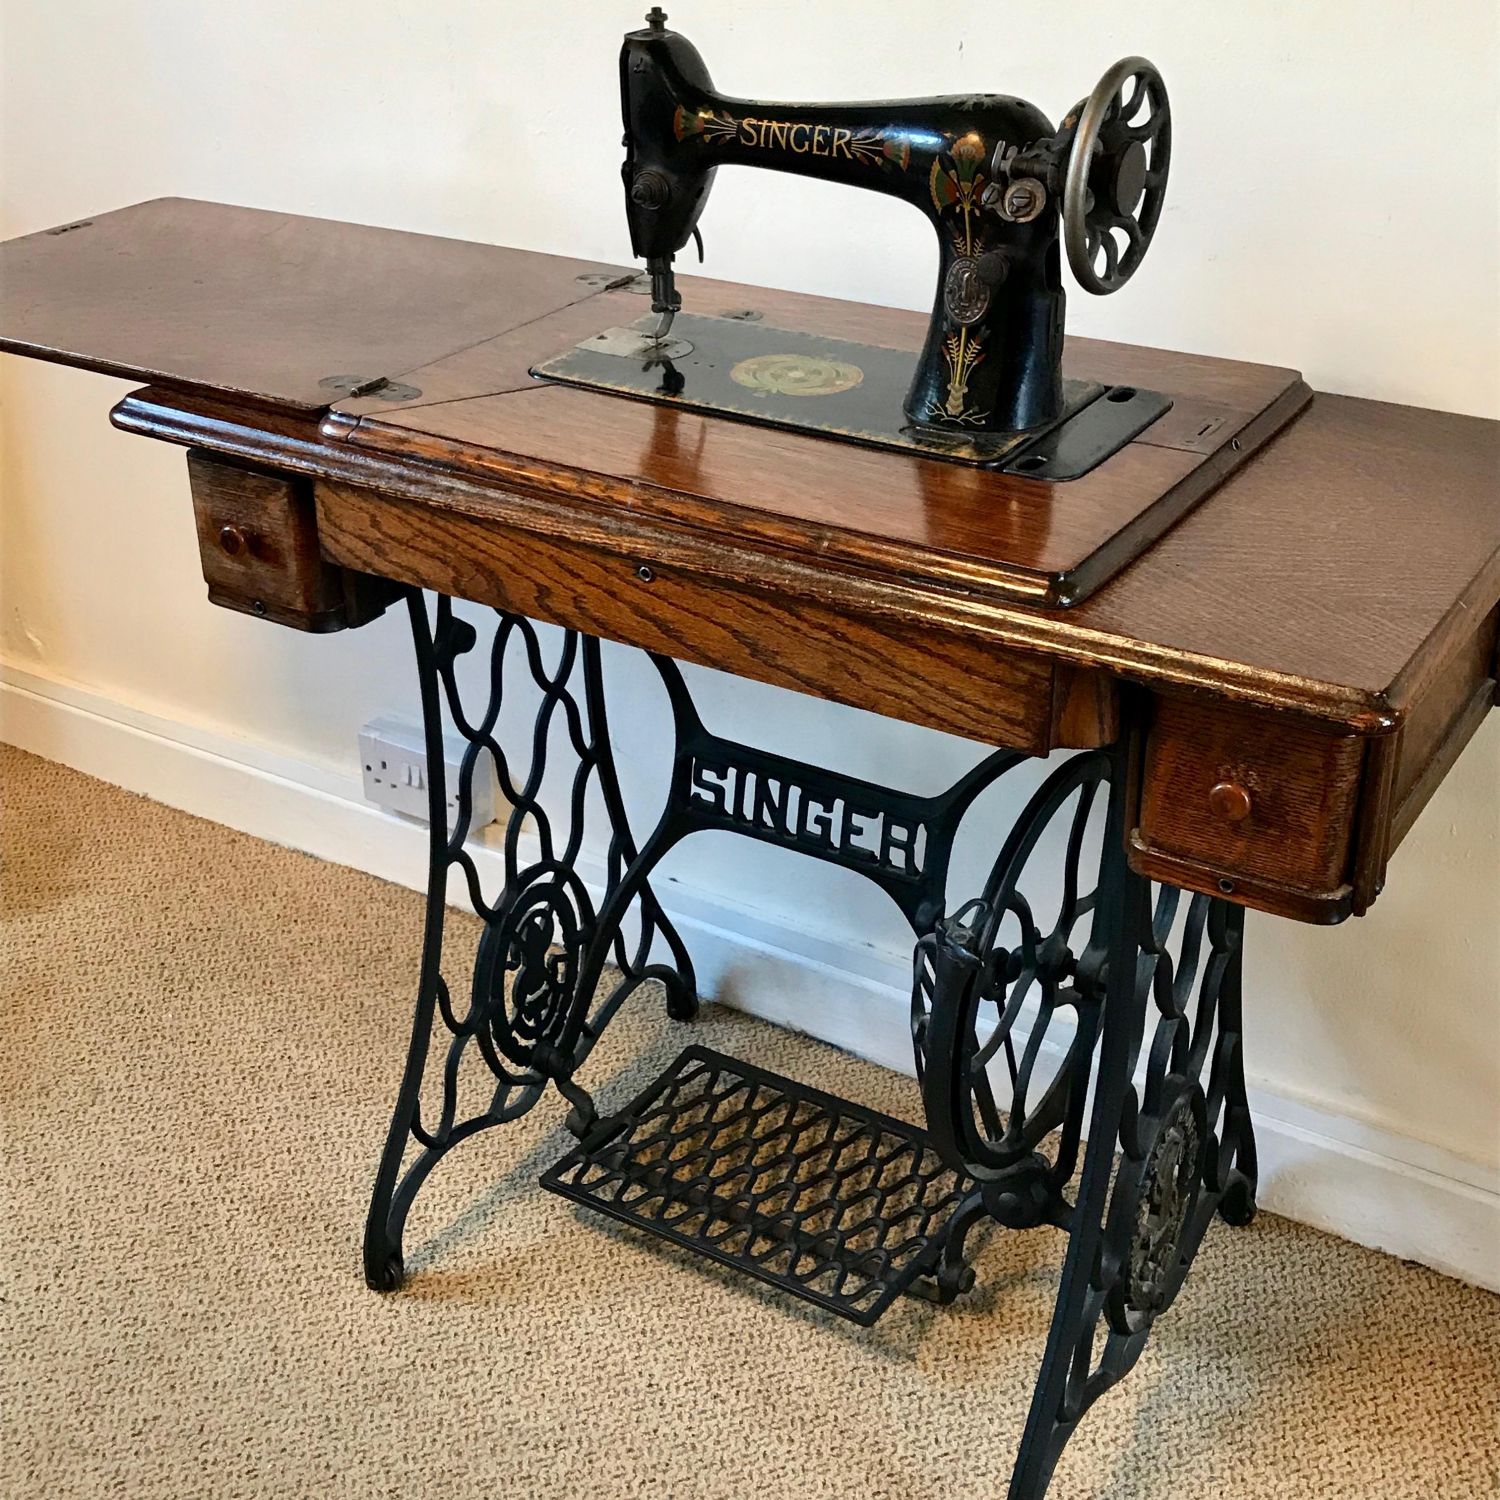 Antique Singer Treadle Model Sewing Machine Sews Looks A My Xxx Hot Girl